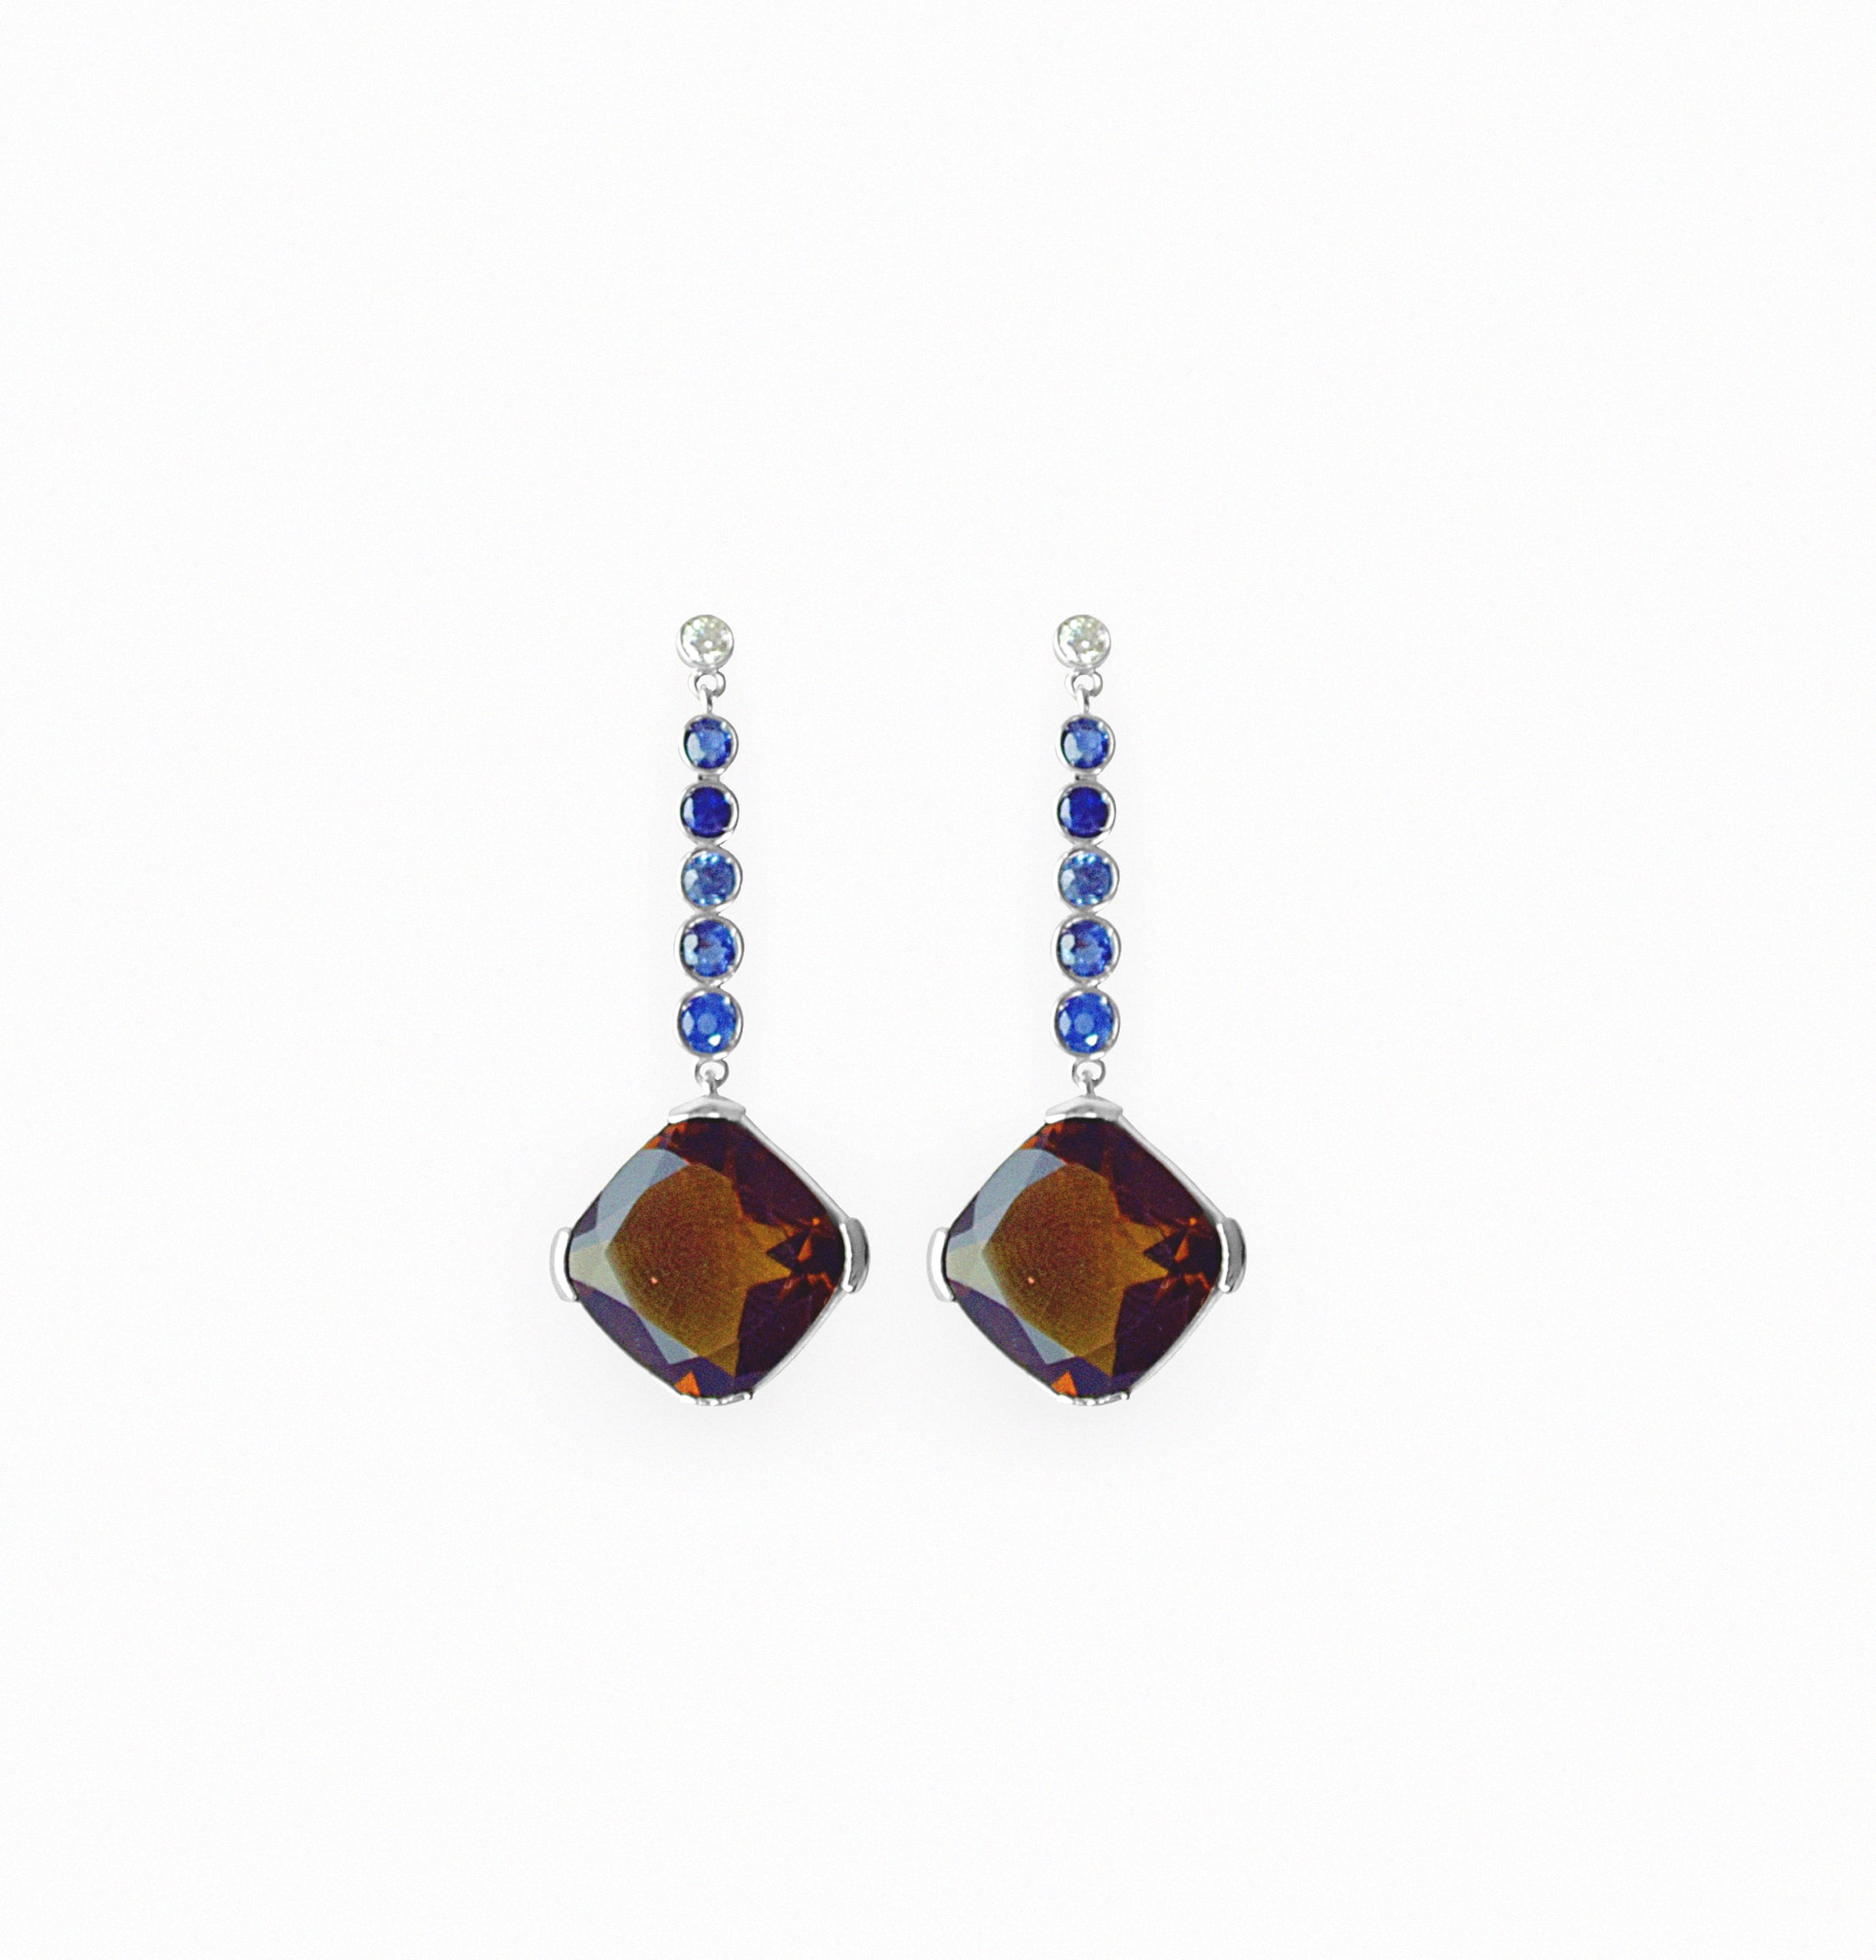 Earrings in white gold and sapphires with smoky quartz